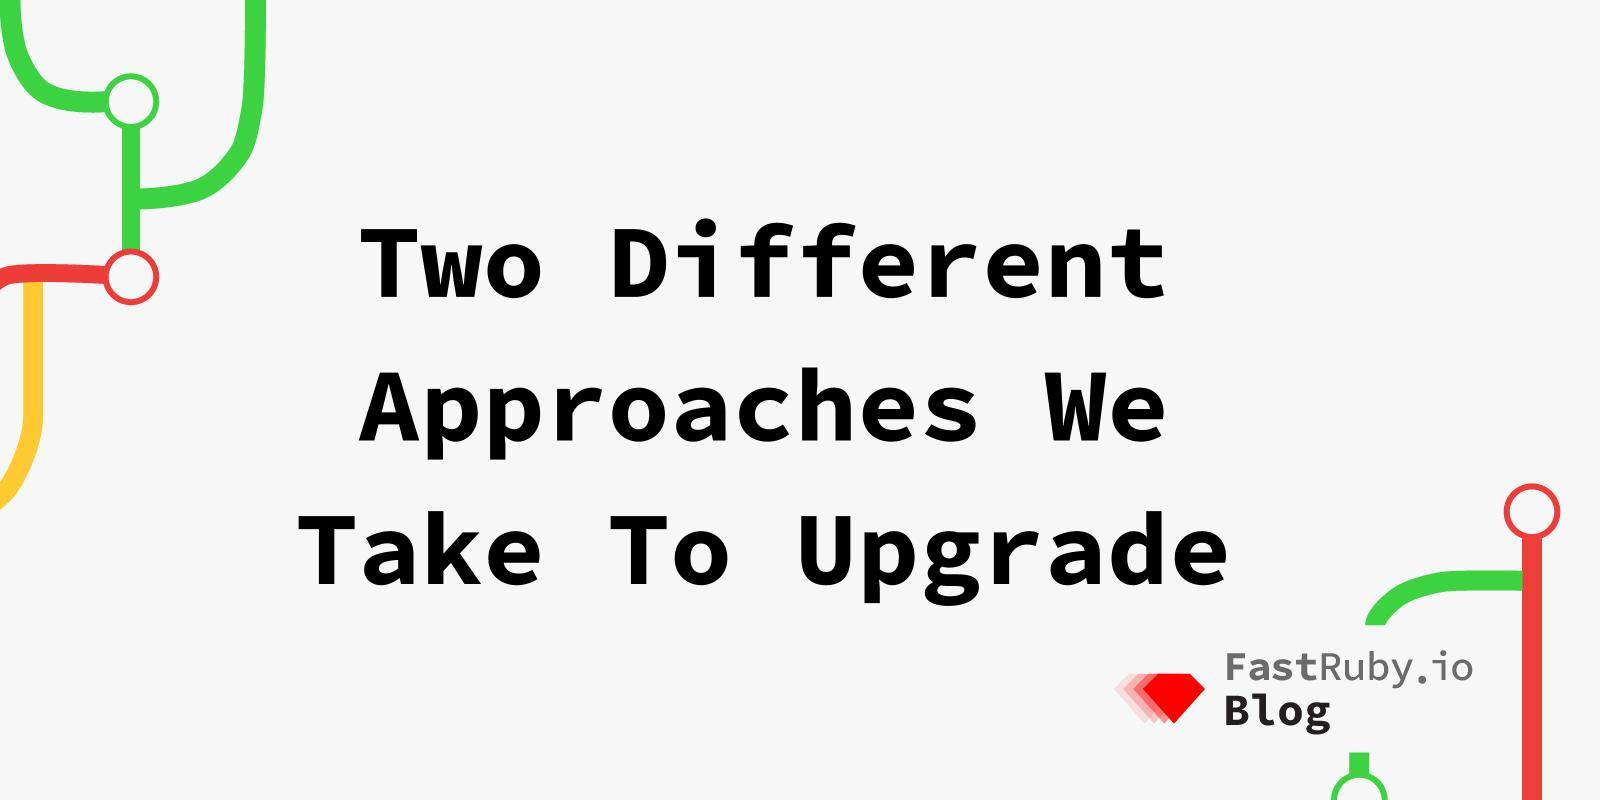 The Two Different Approaches We Take To Upgrade An Application